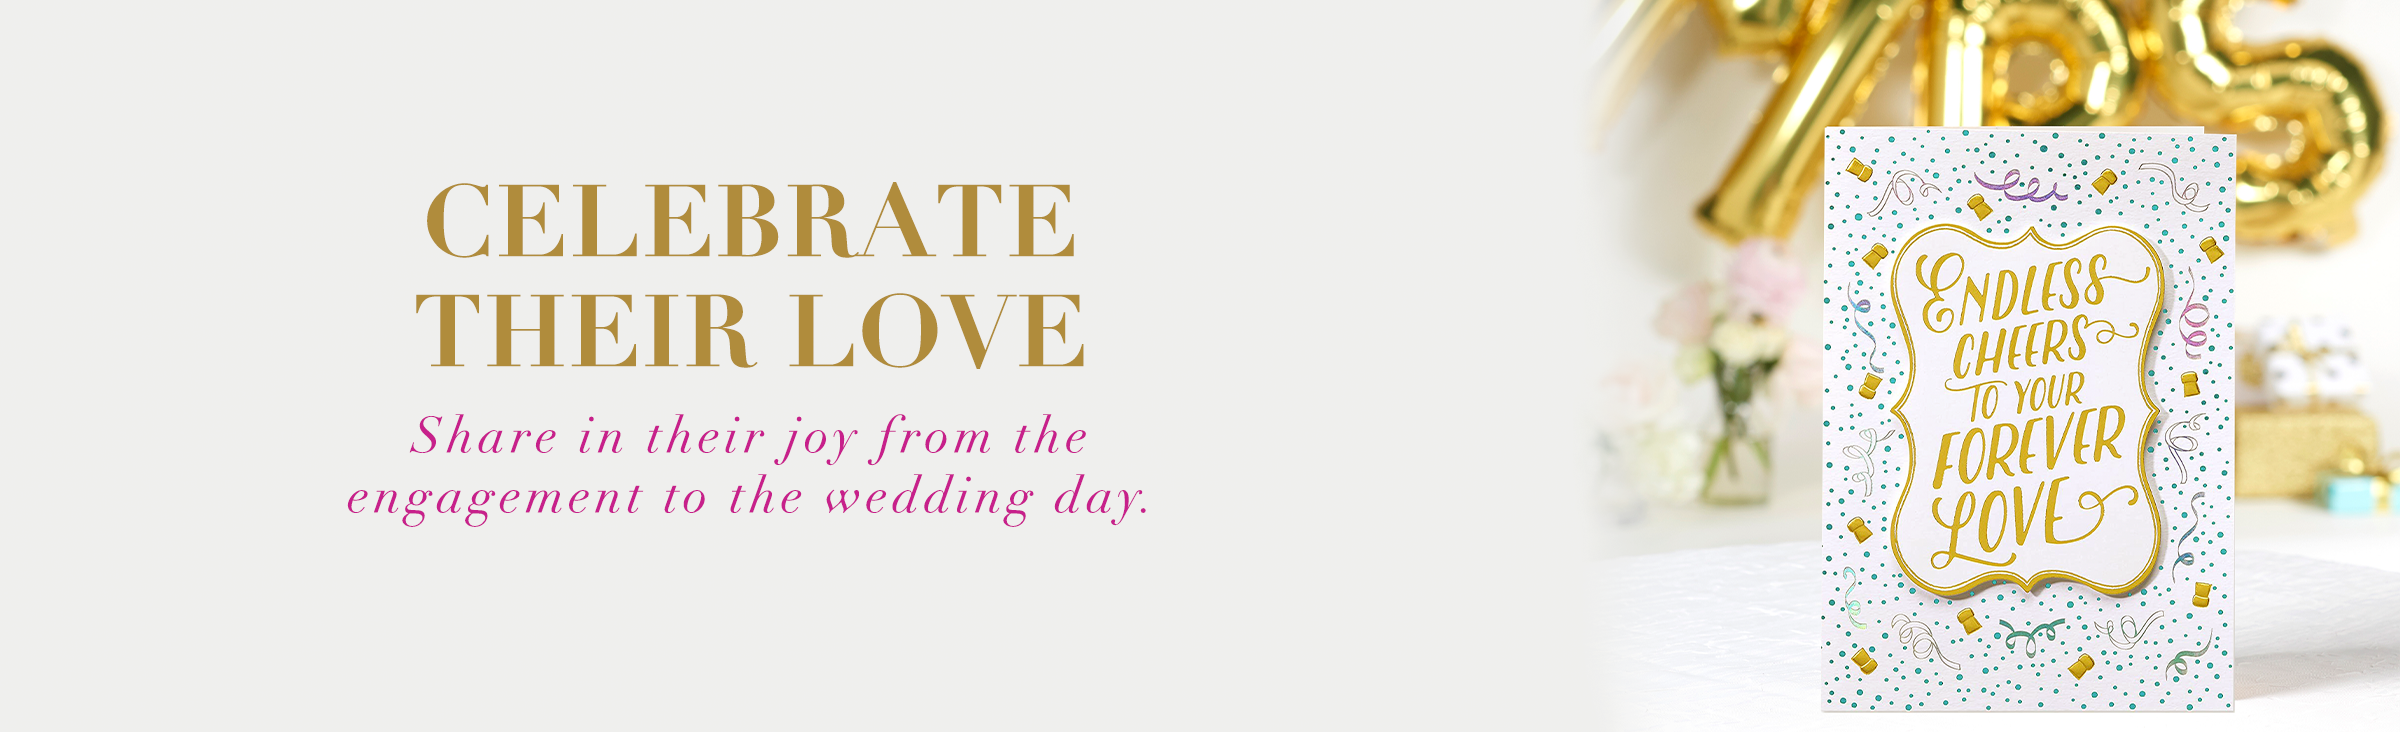 Celebrate Their Love Share in their joy from the engagement to the wedding day